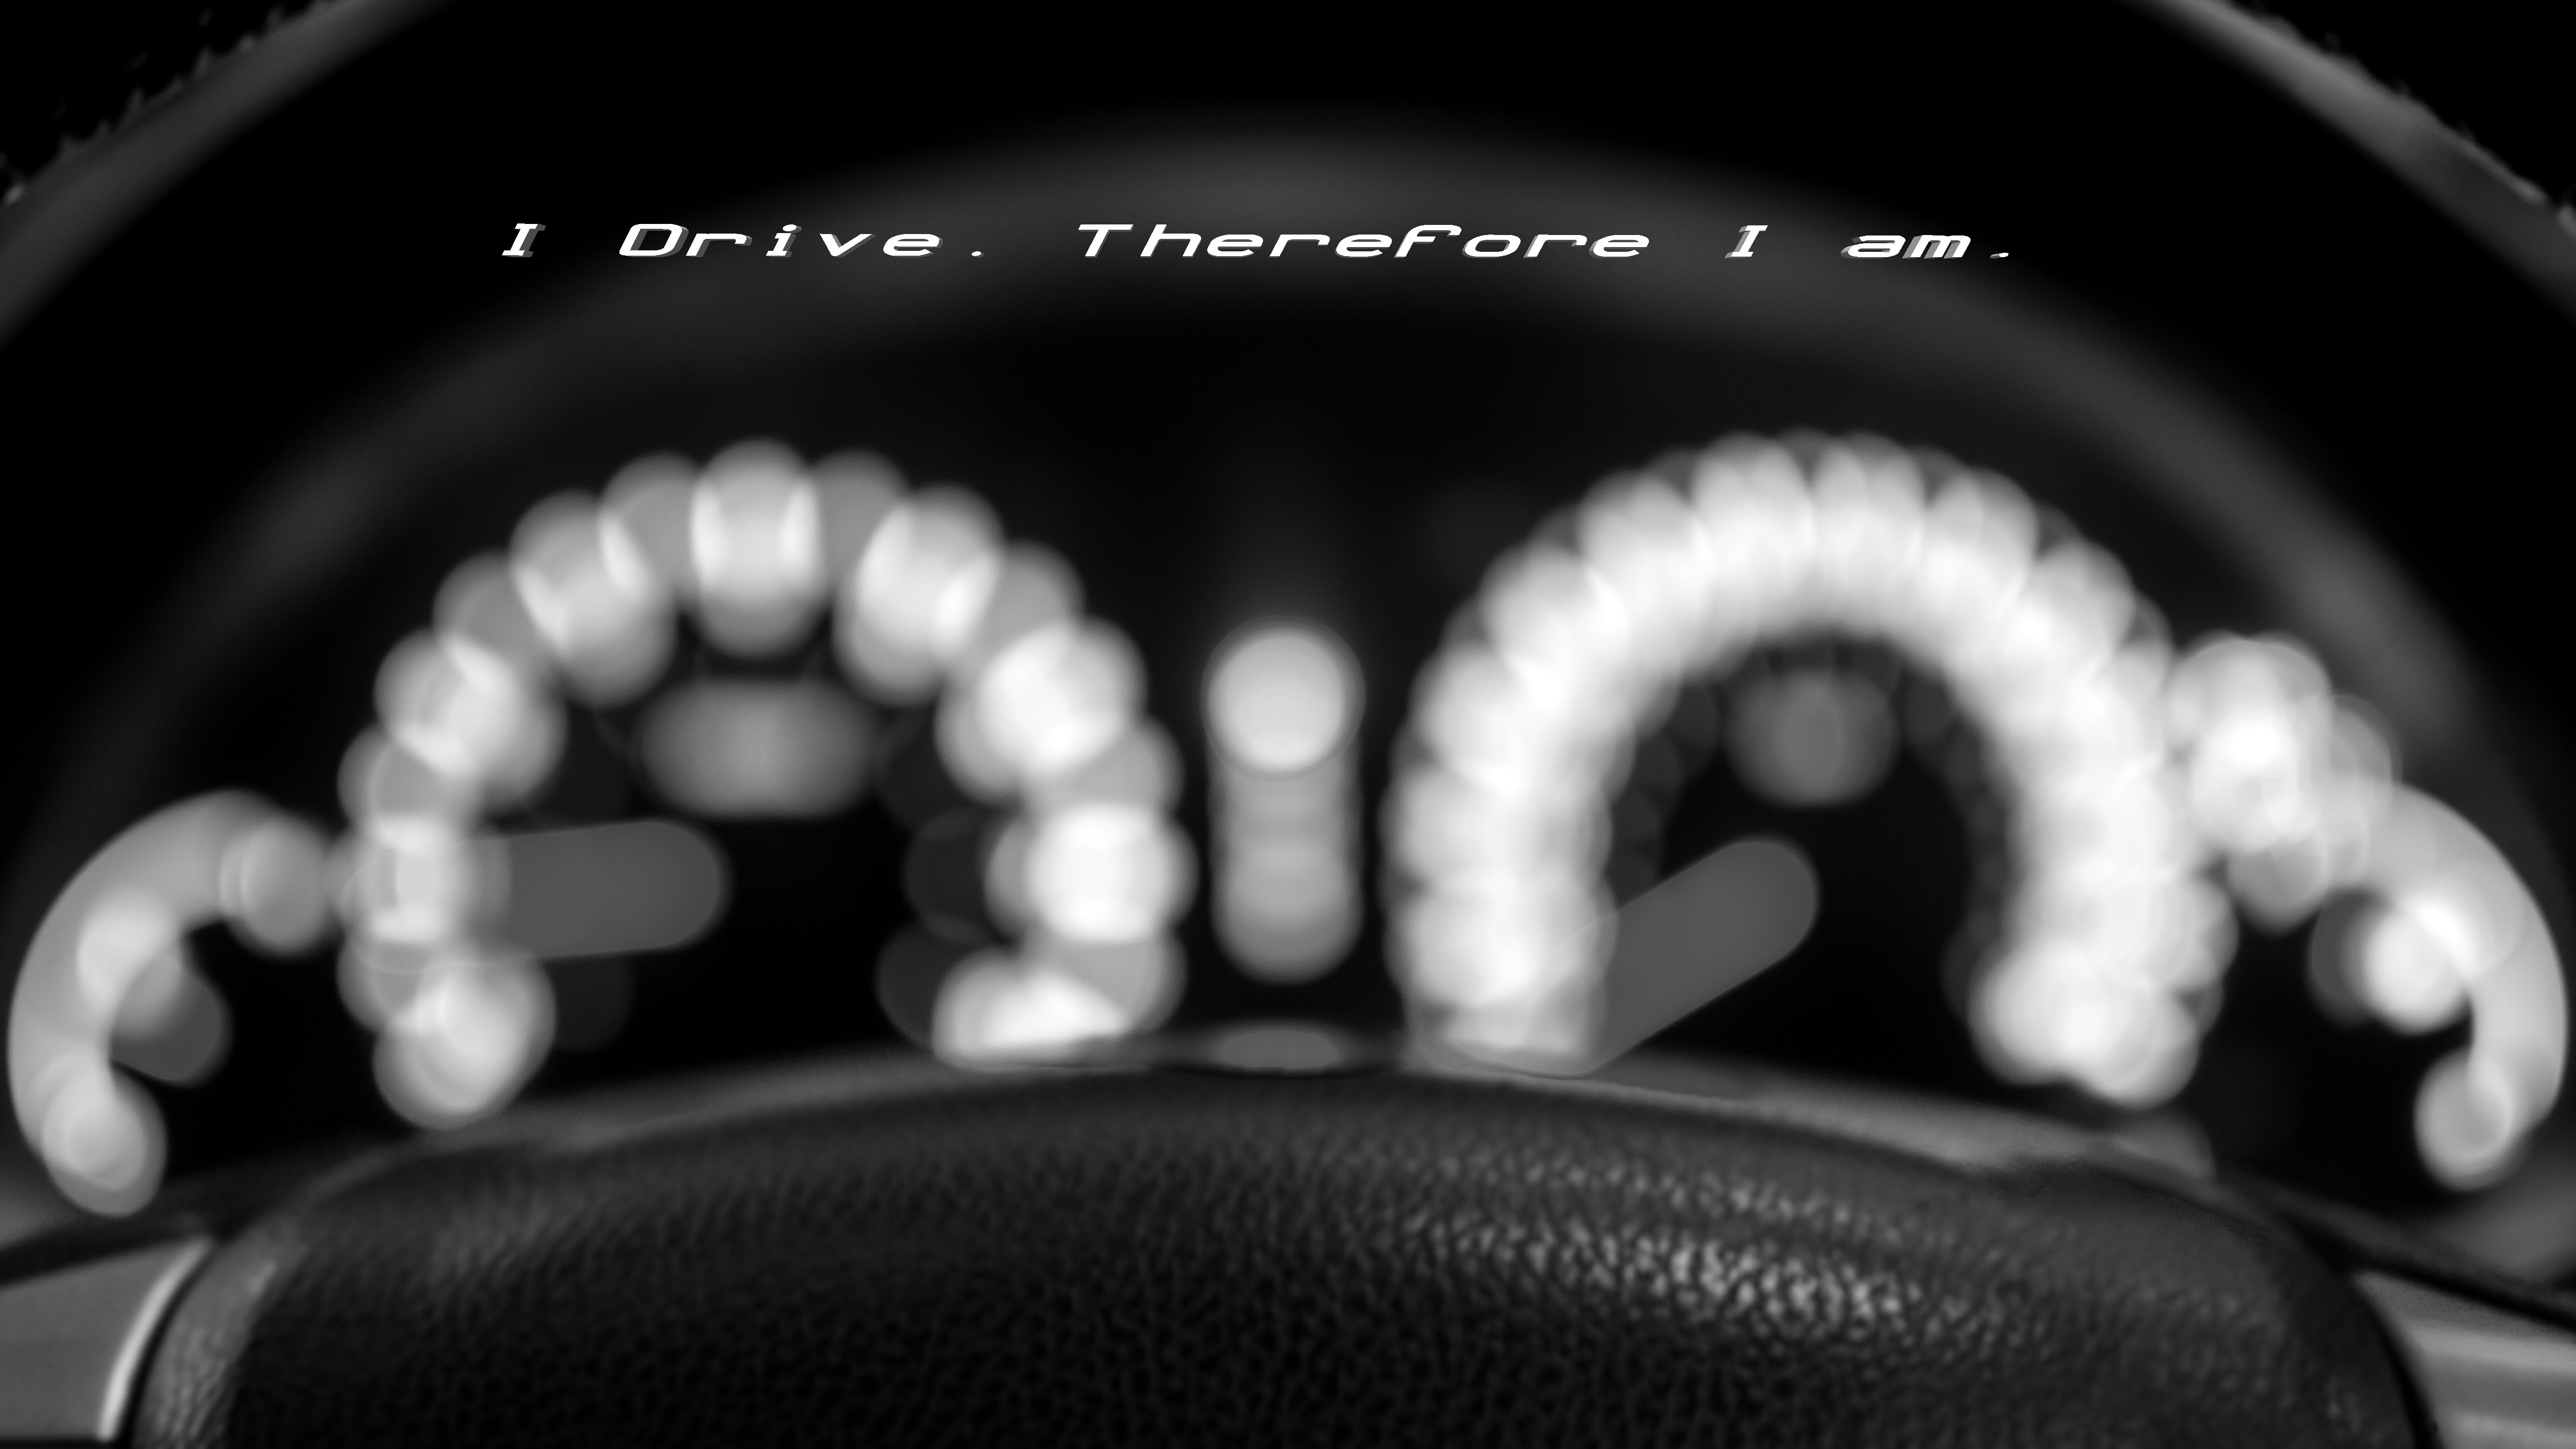 car, Driver, Typography, Quote, Honda accord, Instrument panel Wallpaper